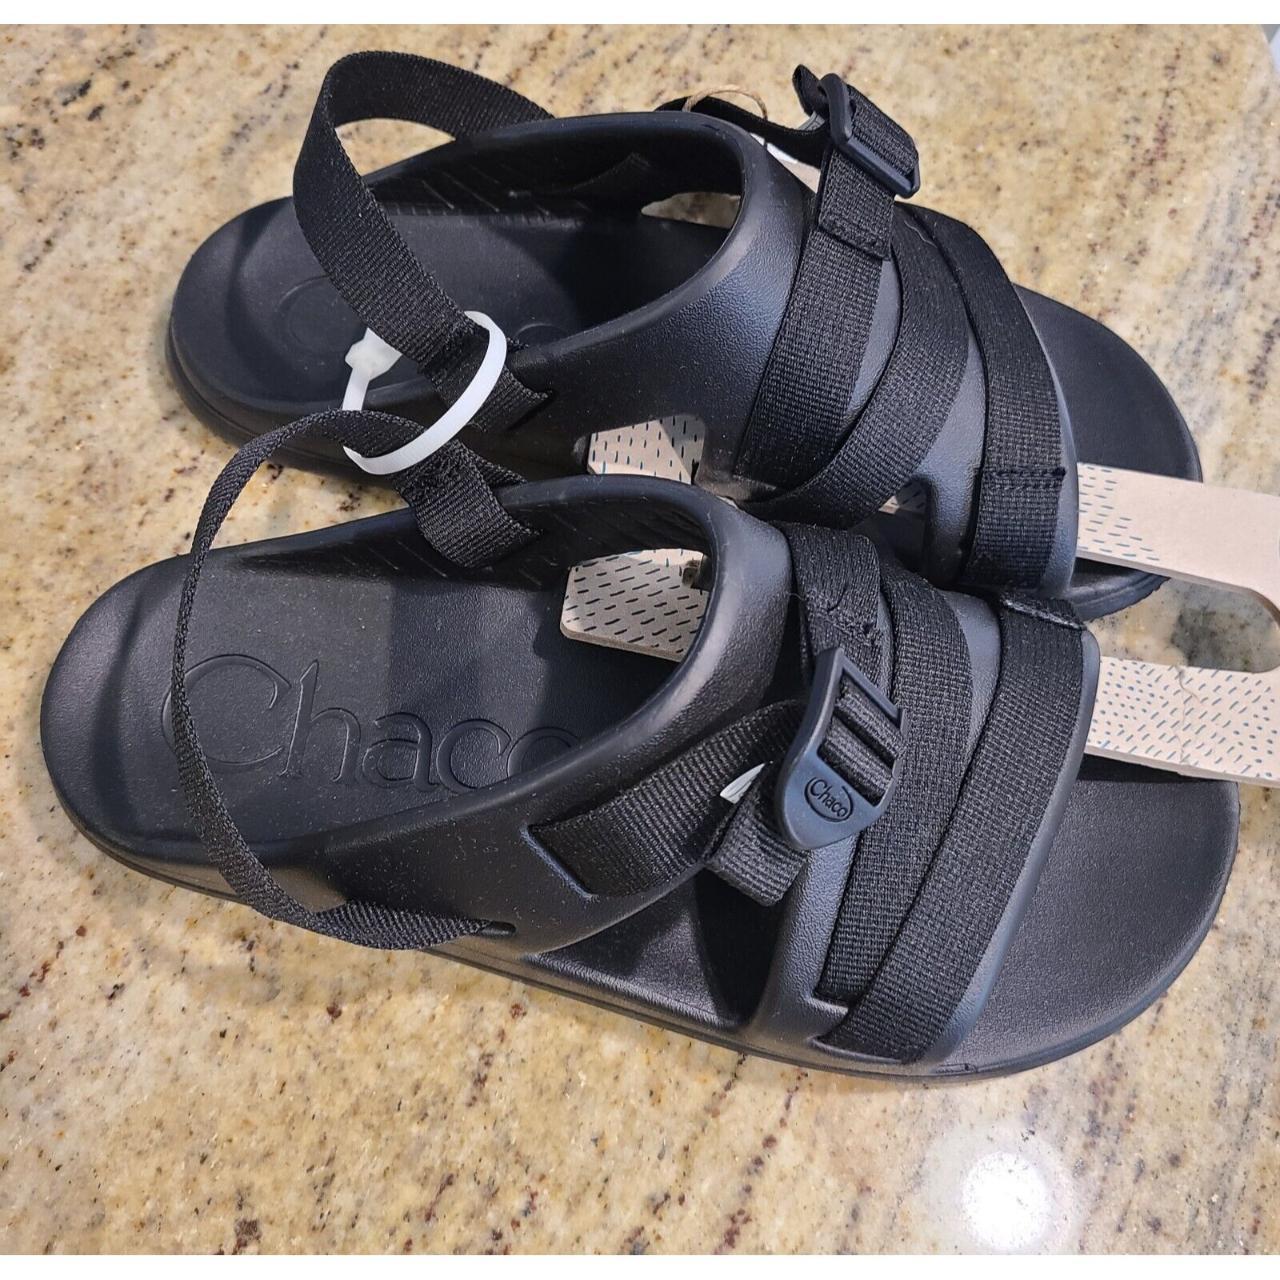 New! Chaco Shoes Women's Size 10 Chillos Sport Black... - Depop